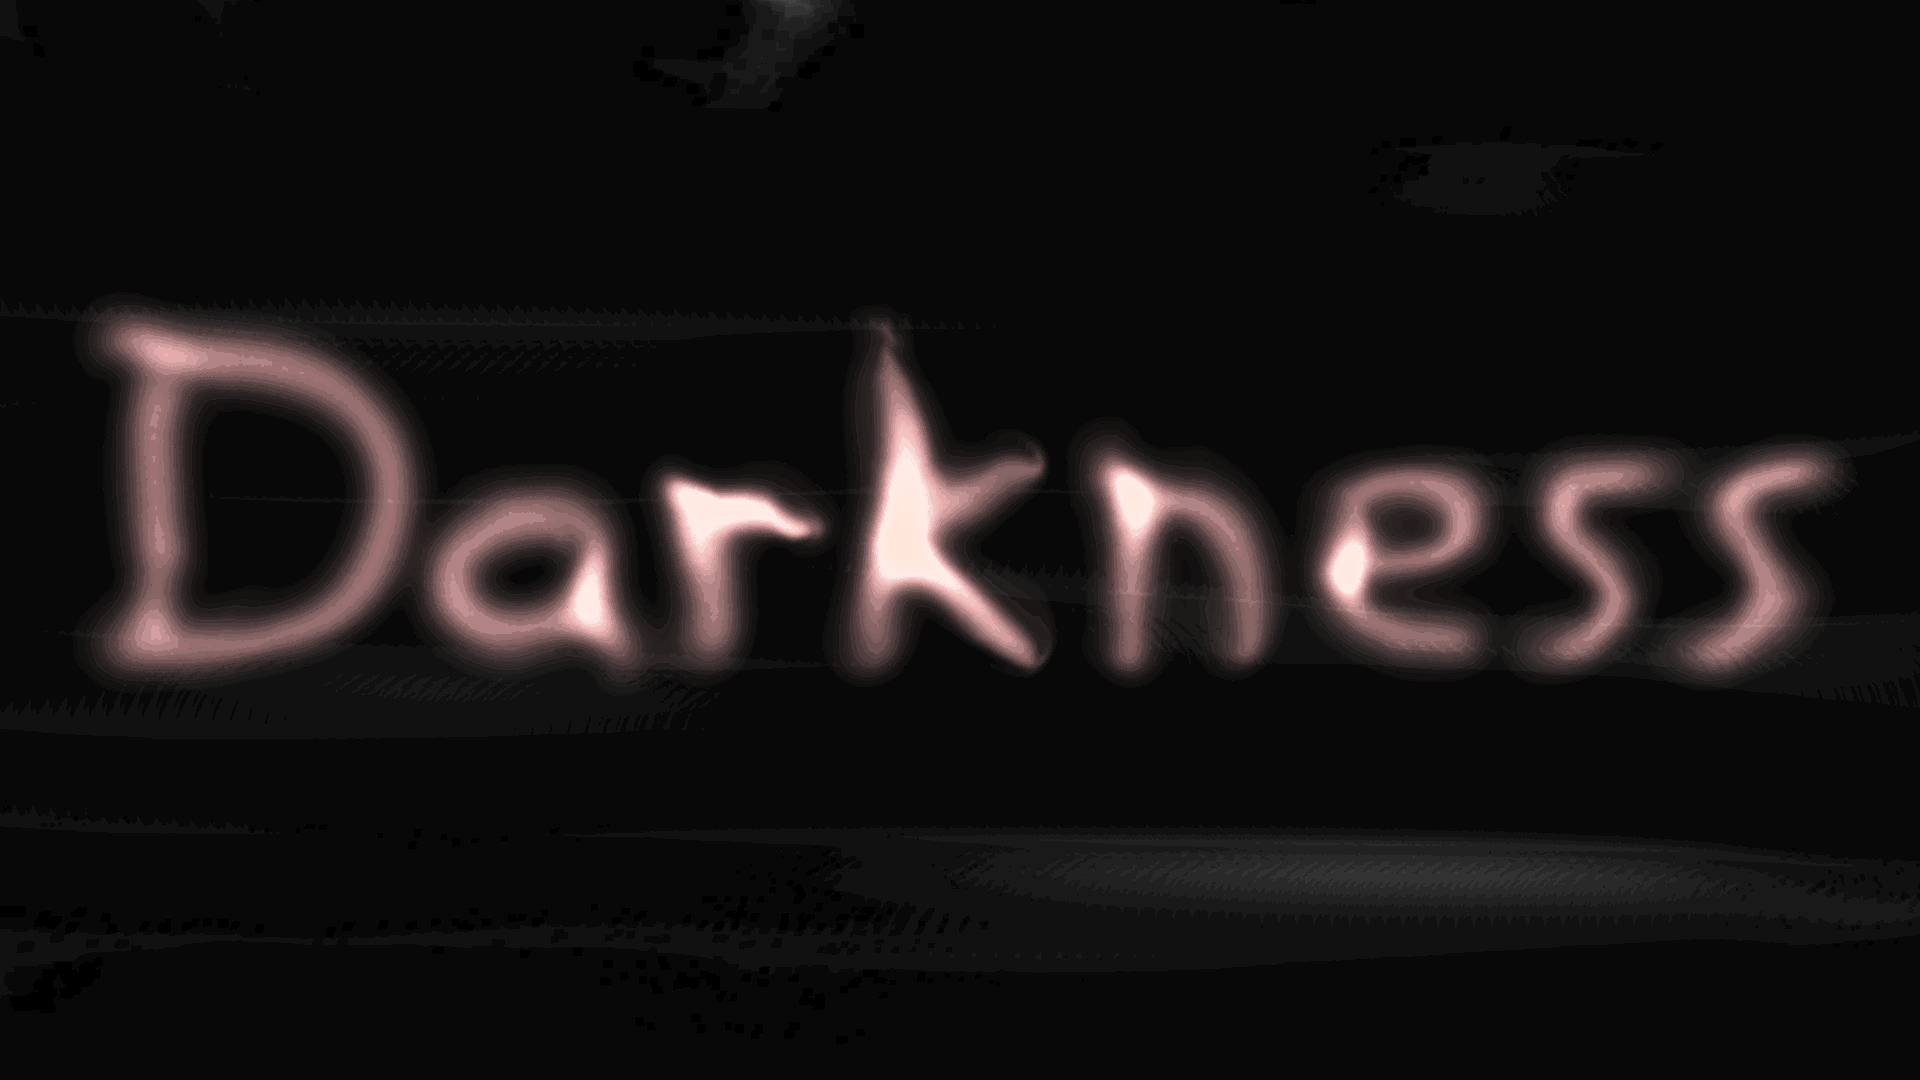 NoNamesLeftToUse - Darkness.png